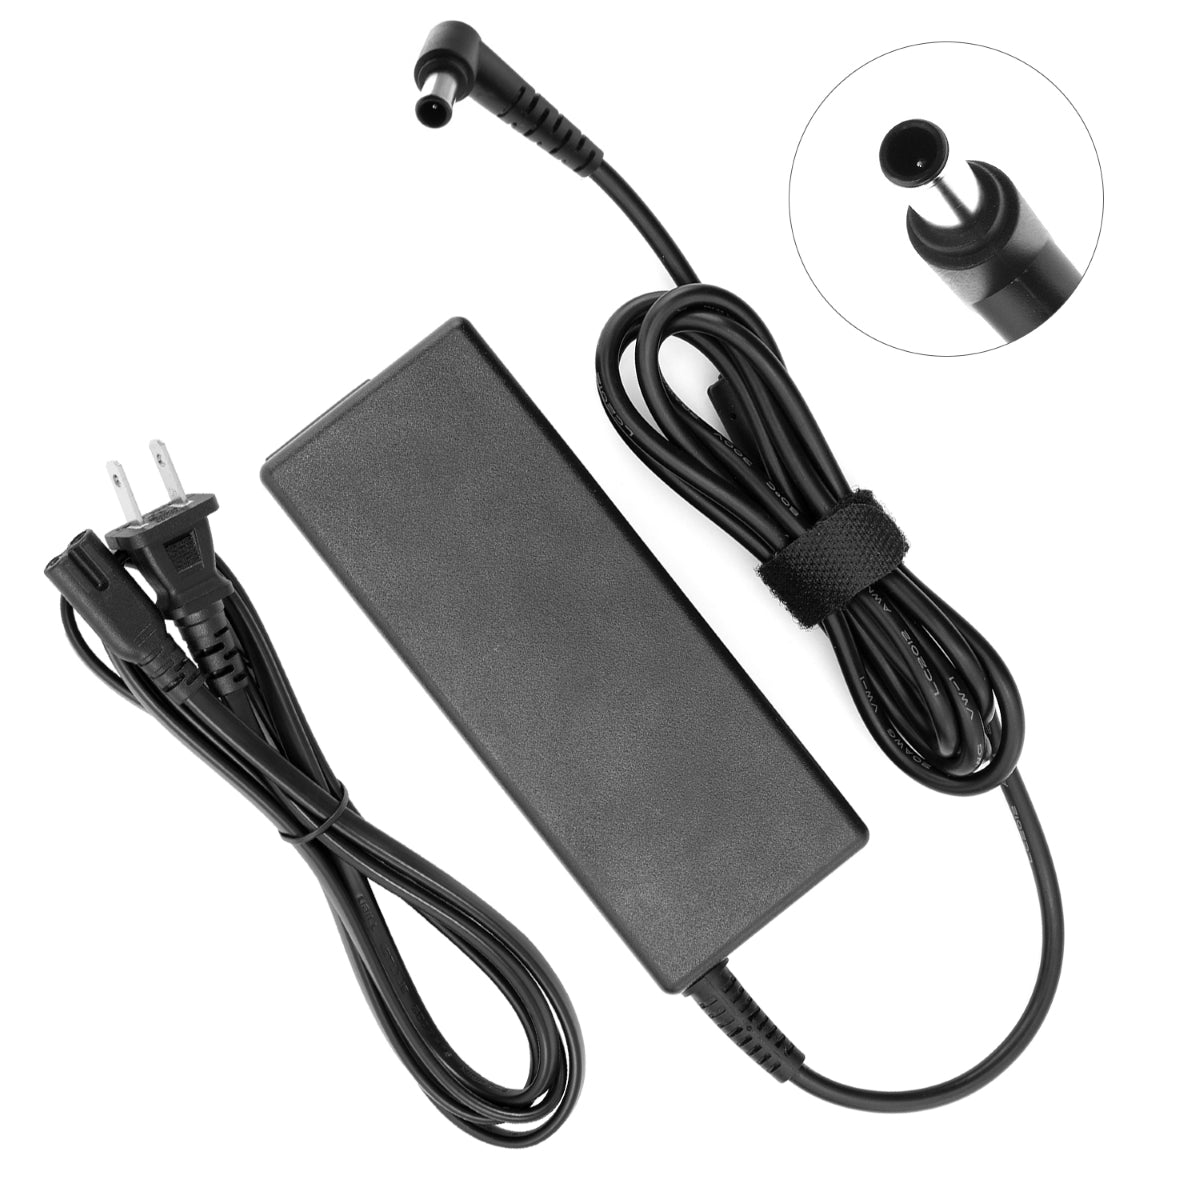 Compatible Replacement Fujitsu Lifebook P7120 Charger